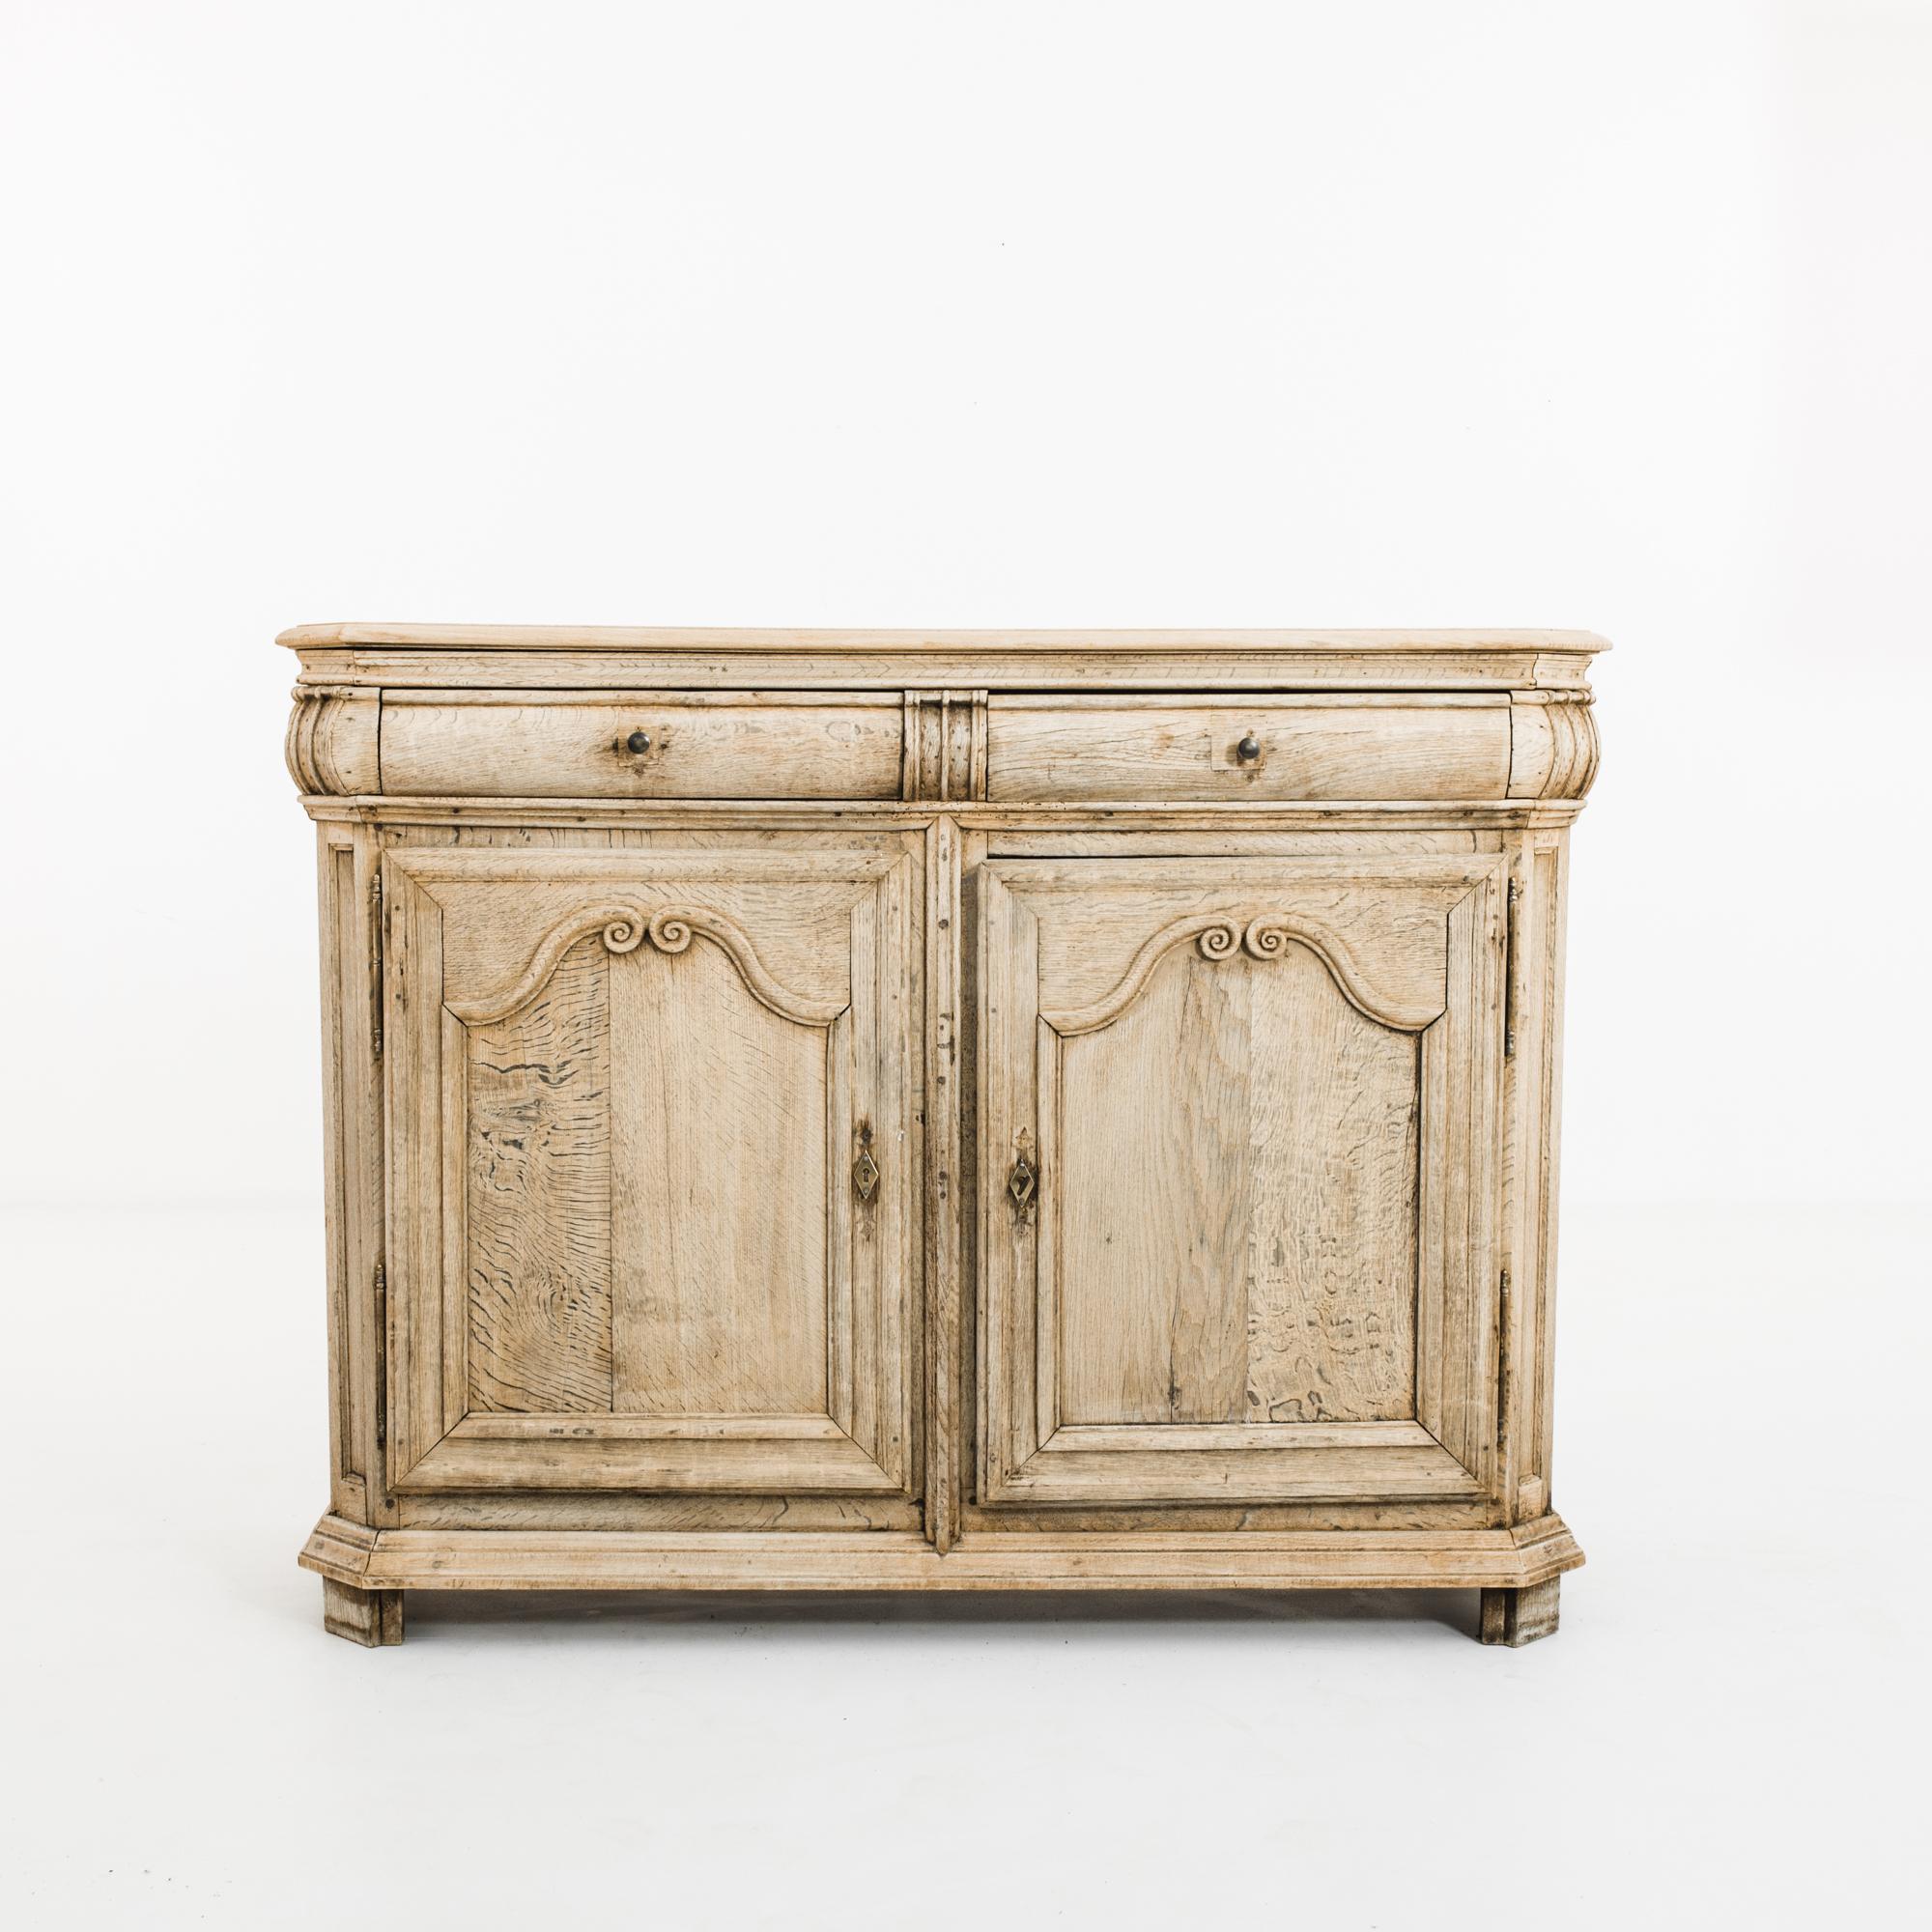 This antique bleached oak buffet was made in France, circa 1800 and imparts the rustic charm of a farmhouse with its light finish. It features chamfered corners and paneling with arches composed of scrolls, highlighting the exceptional workmanship